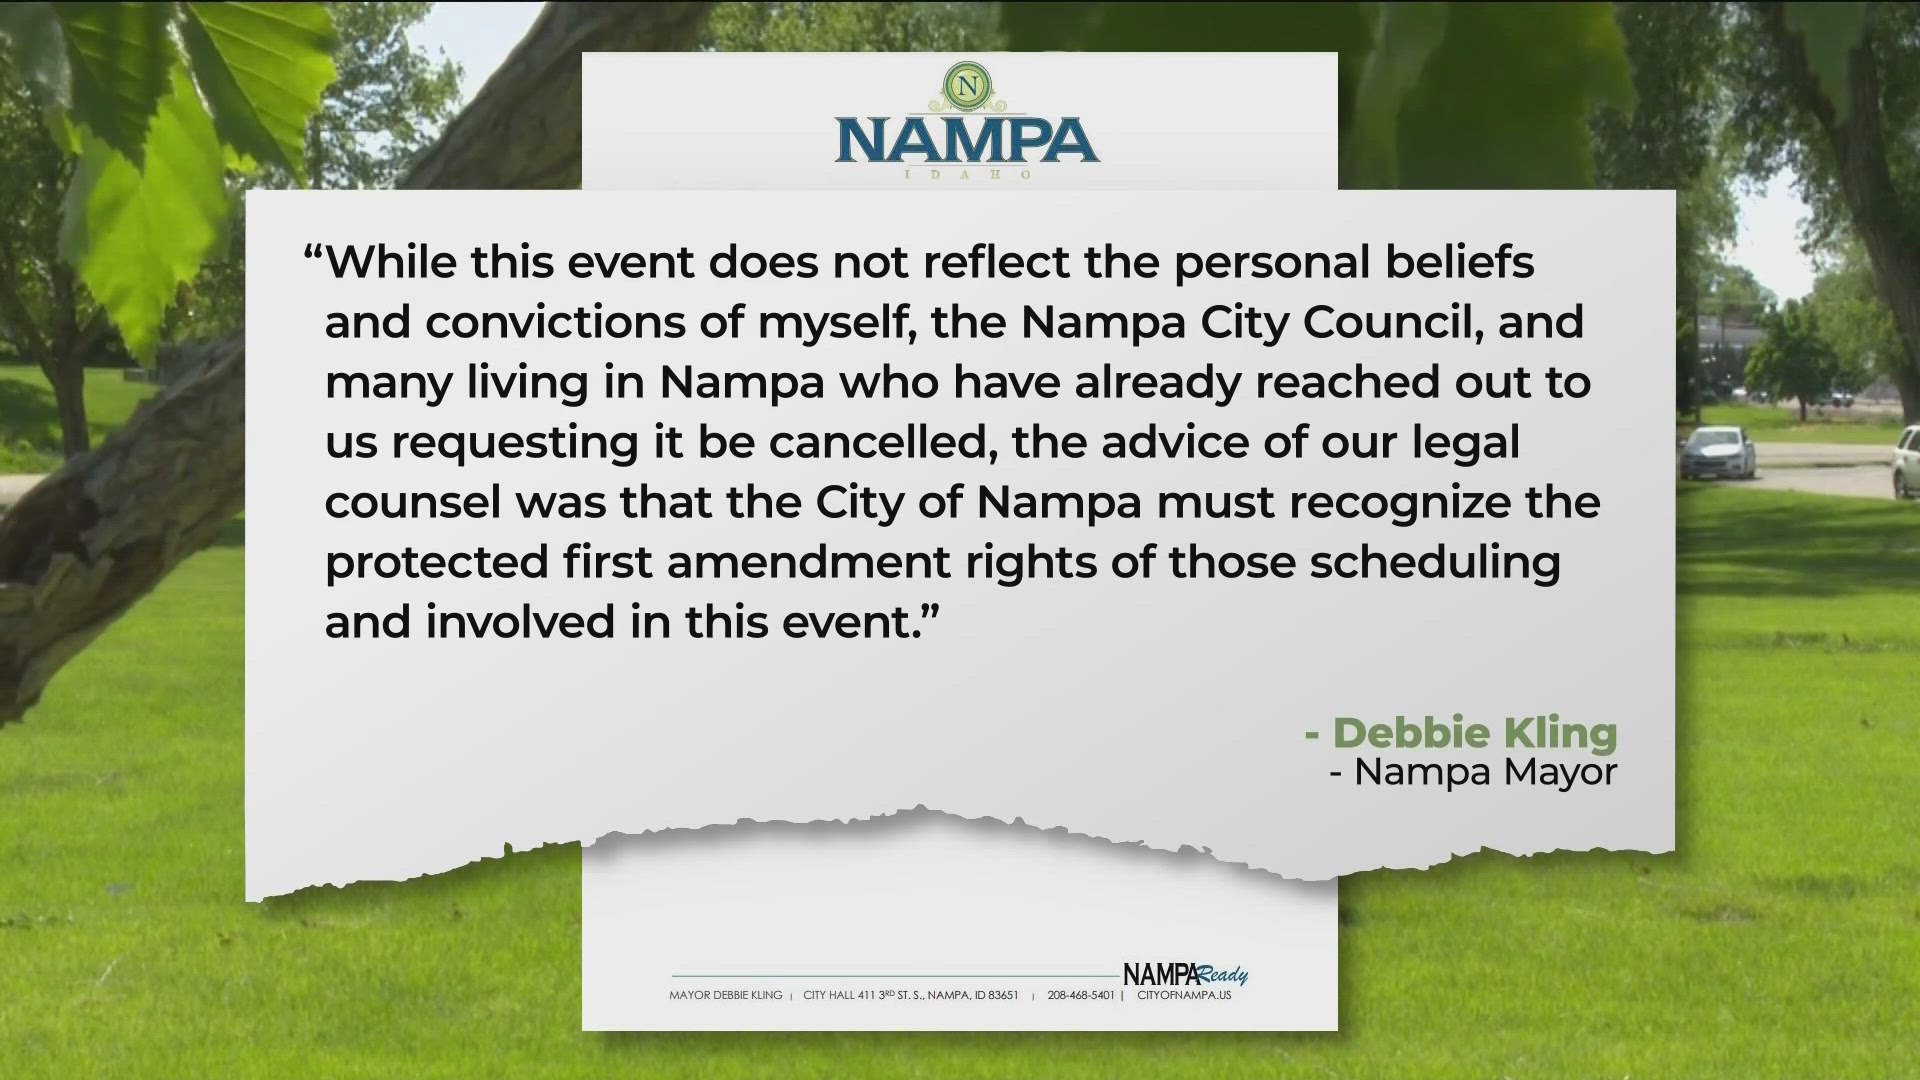 Nampa Mayor Debbie Kling stated the "event does not reflect my personal beliefs." Legal counsel told them their First Amendment rights should be protected.